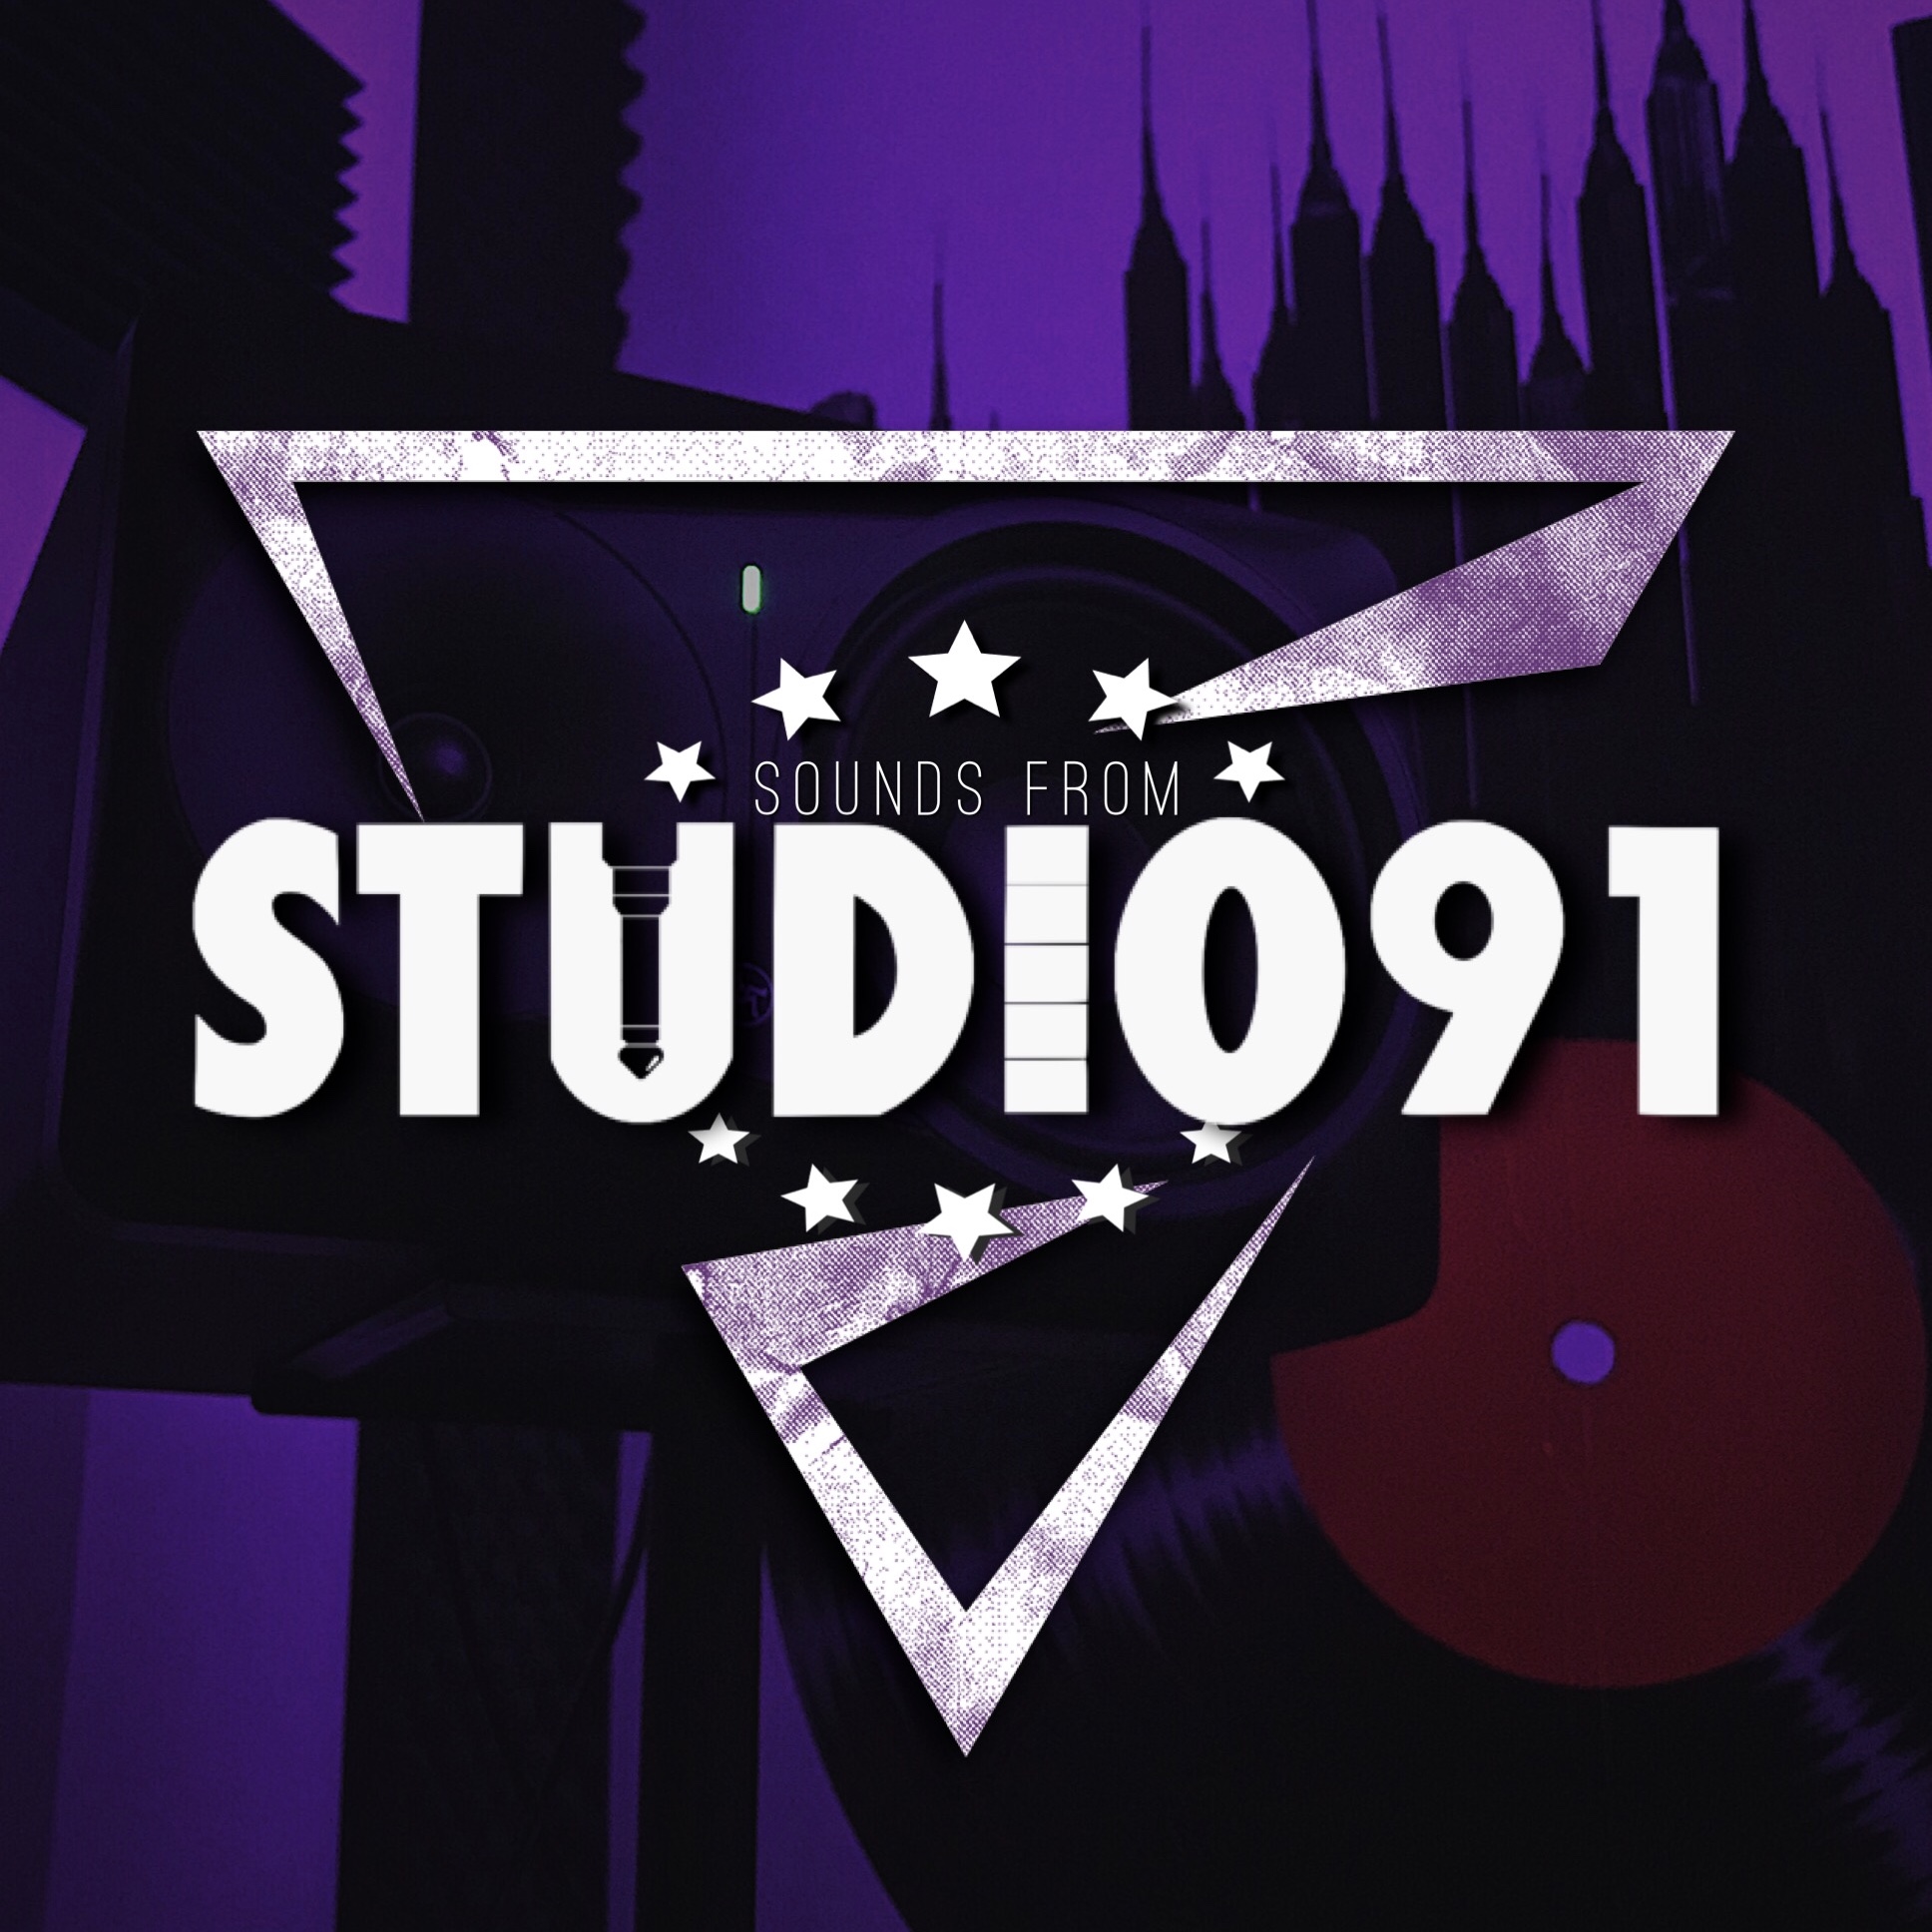 SOUNDS FROM STUDIO91